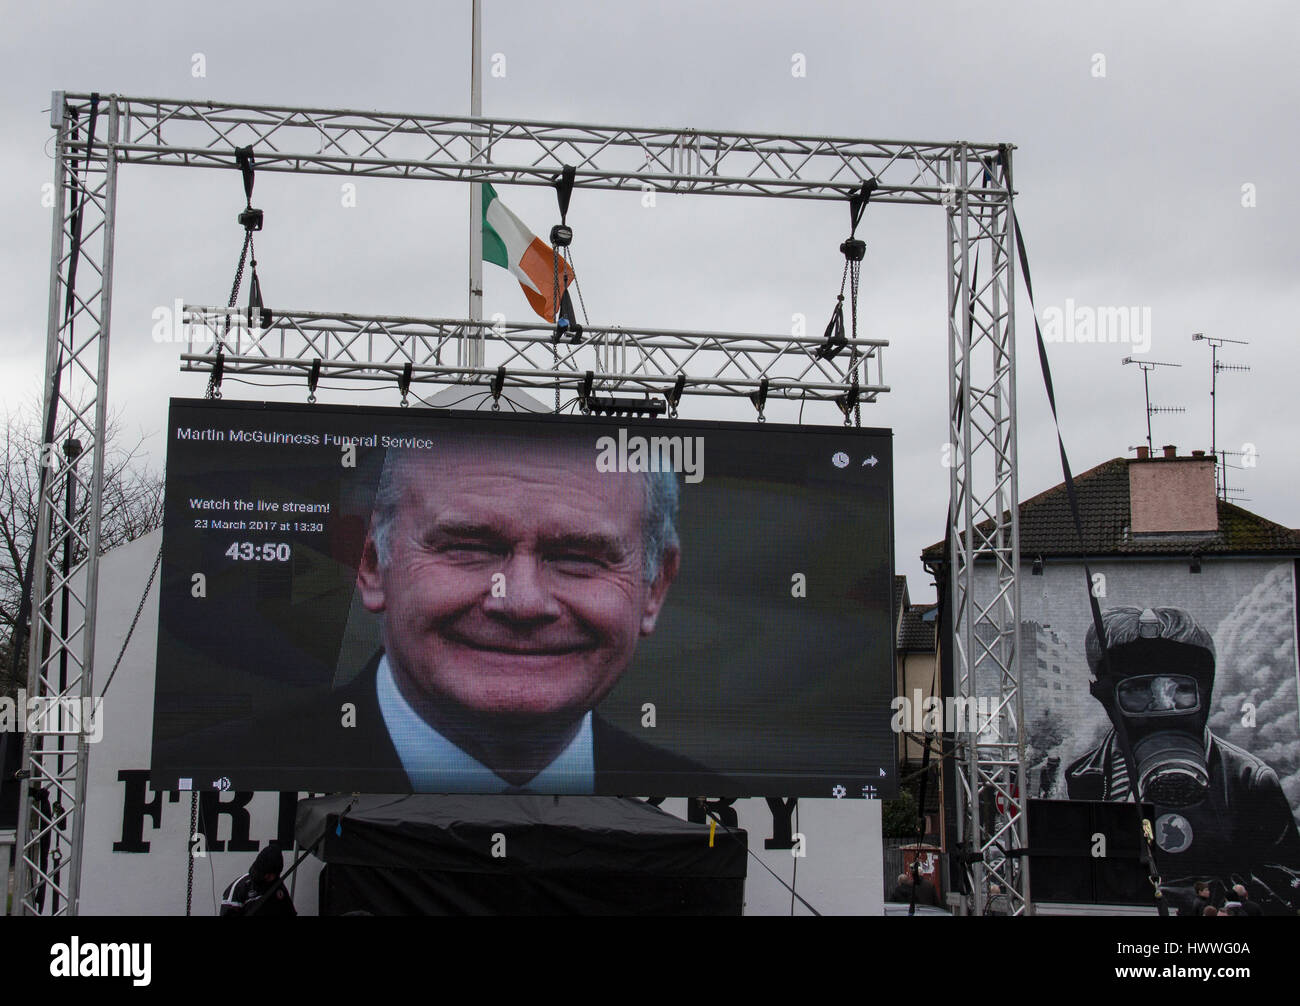 Derry, UK, 23 March 2017. Screen showing the funeral of Martin McGuinness with battle of the Bogside mural in the backround. Photo by Mickey Rooney/Alamy Live News  Stock Photo